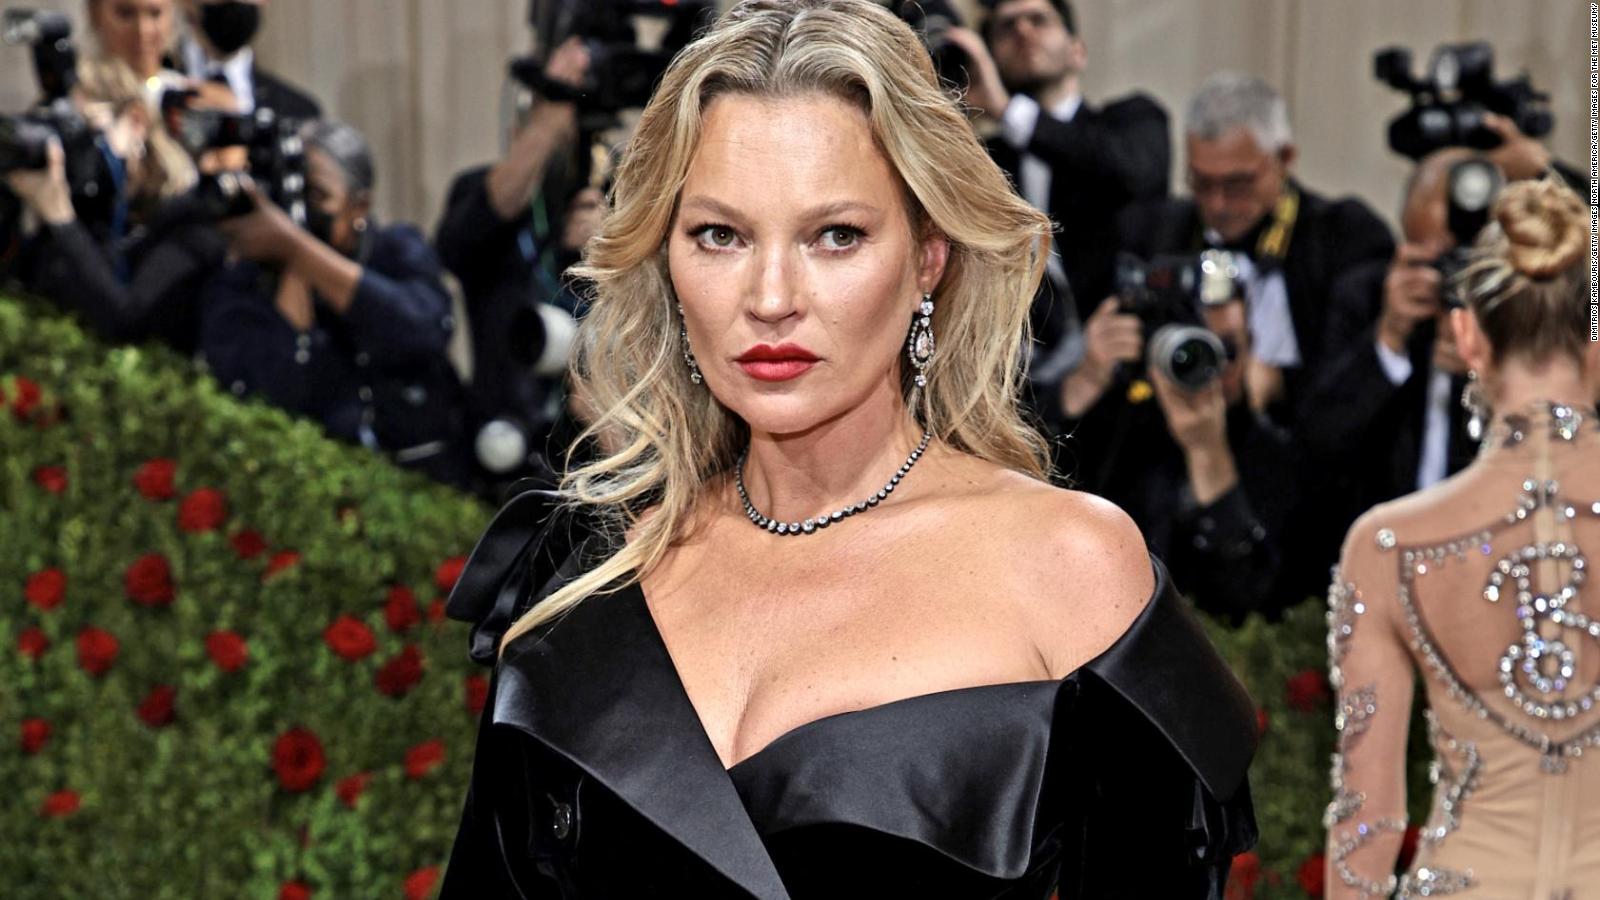 Kate Moss Latest Photo In Black Dress Hot